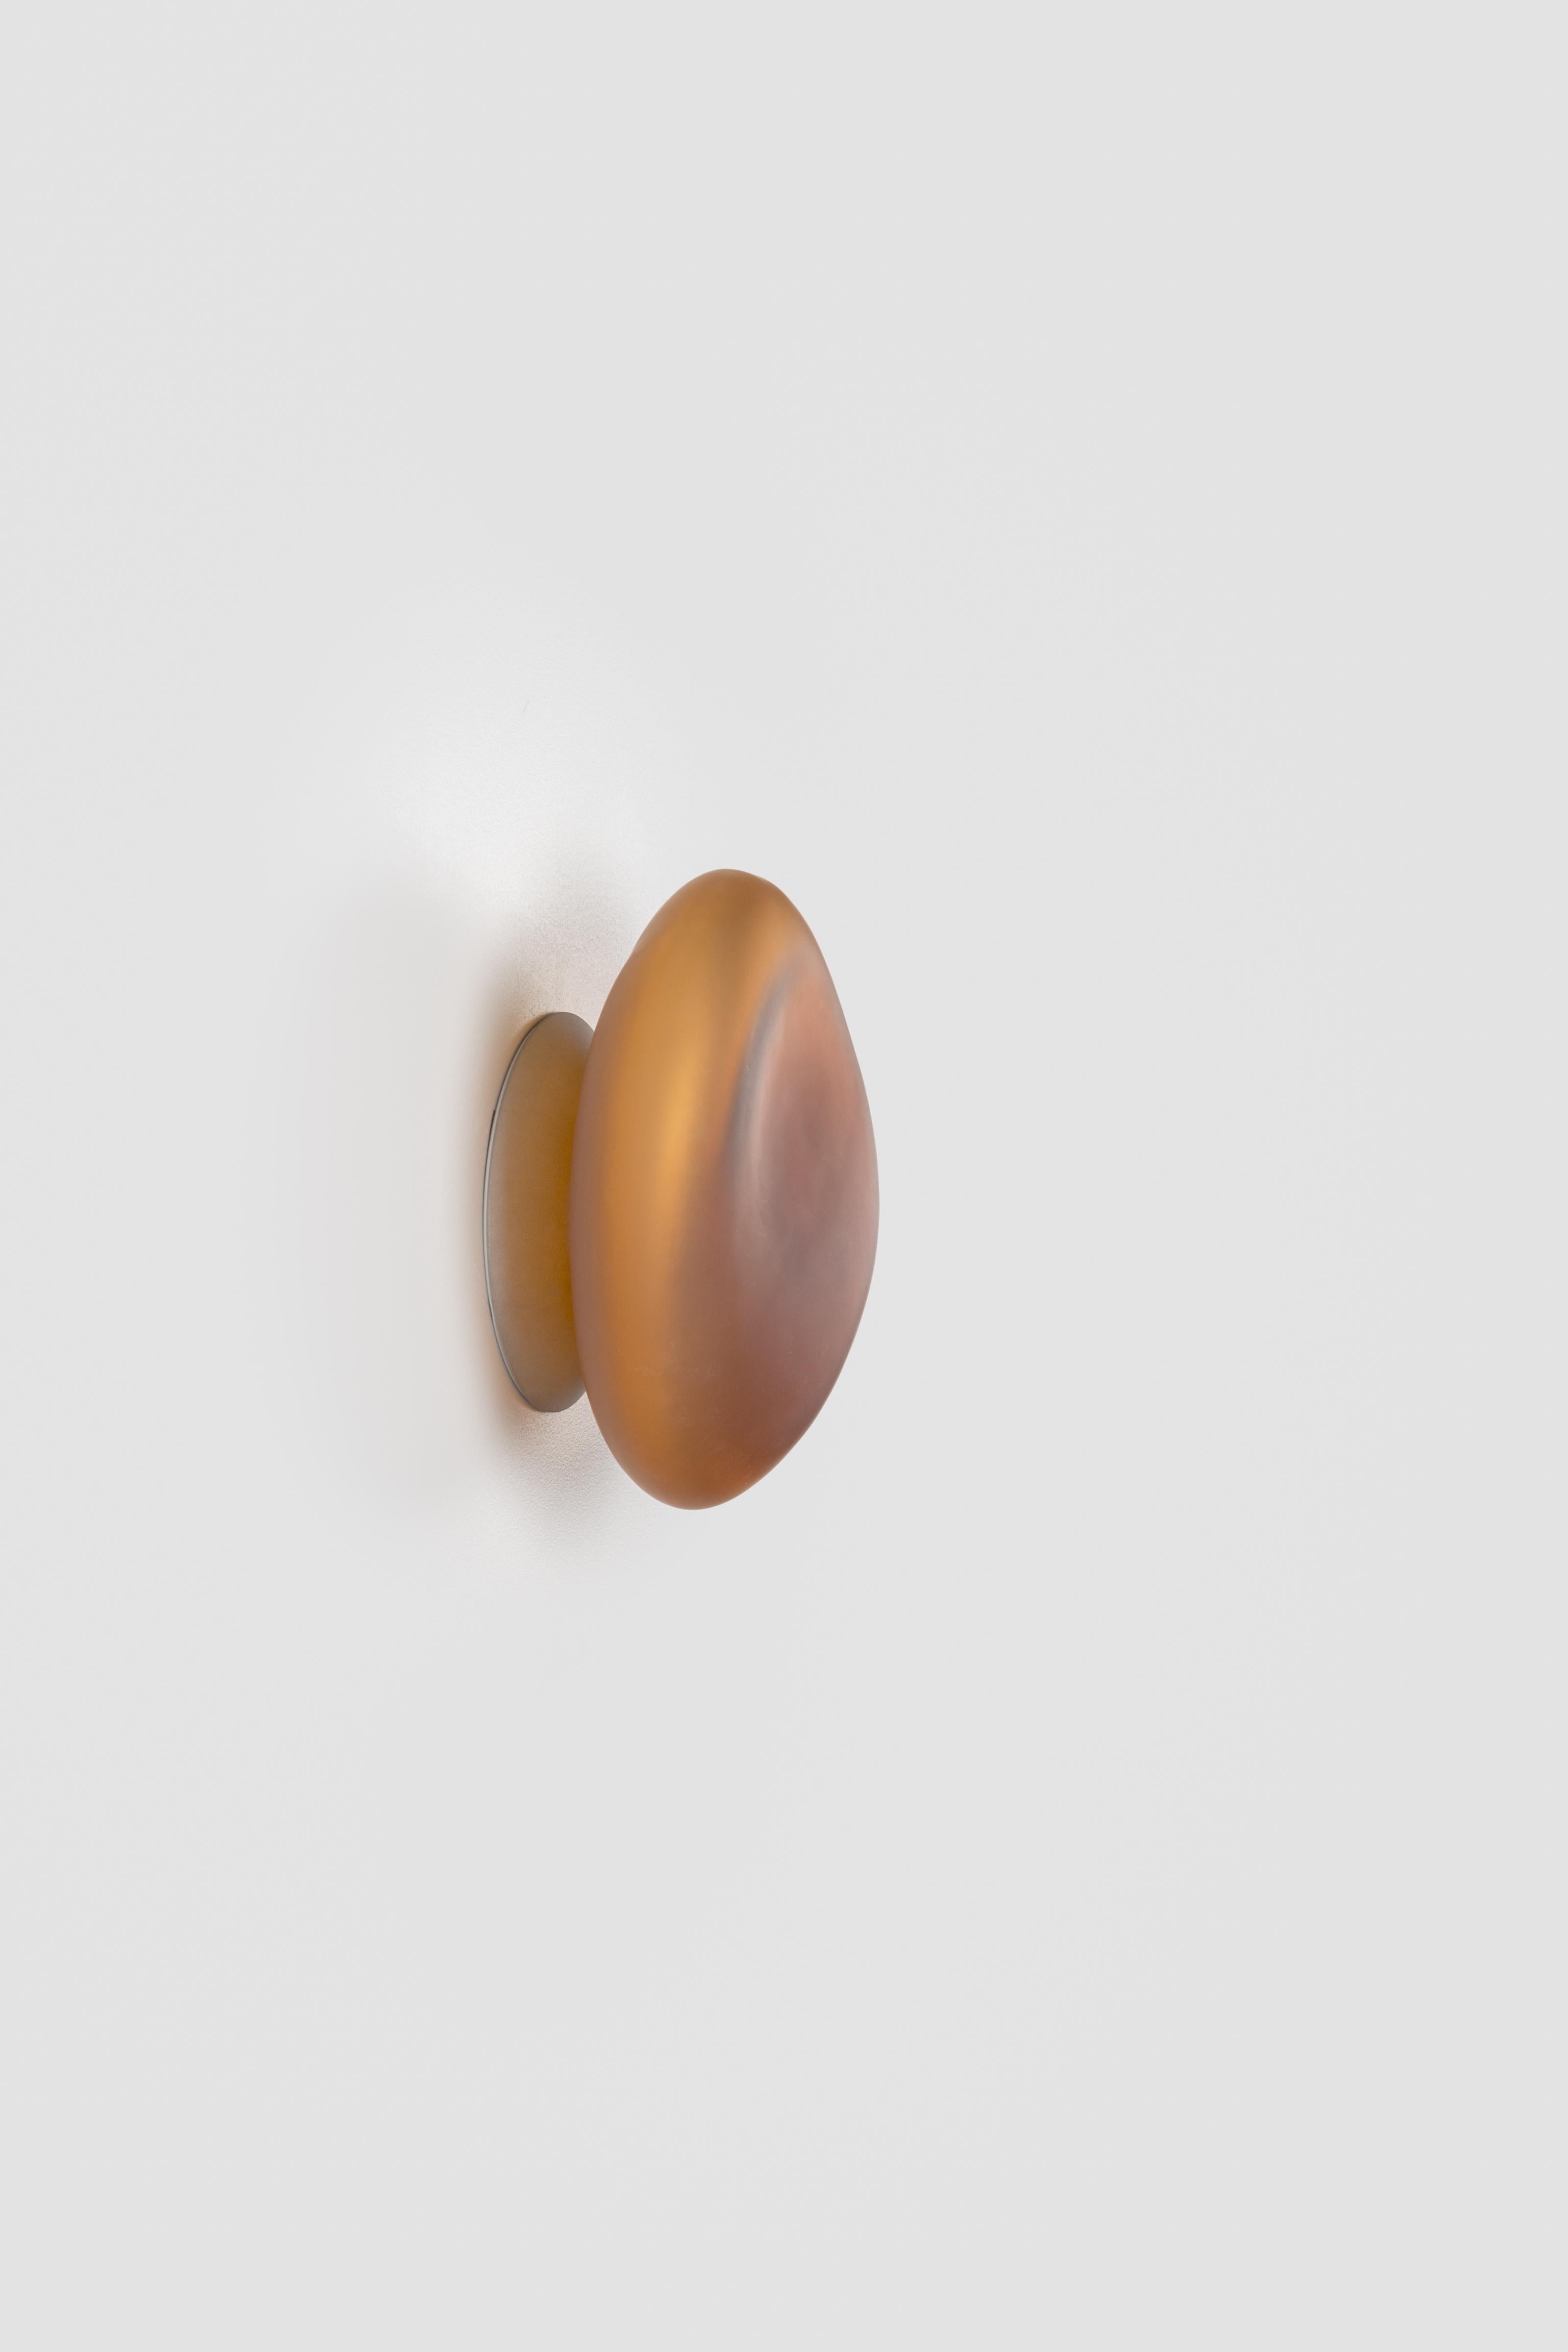 Contemporary Wall Lamp 'Pebble' by ANDlight, Shape D, Citrine In New Condition For Sale In Paris, FR